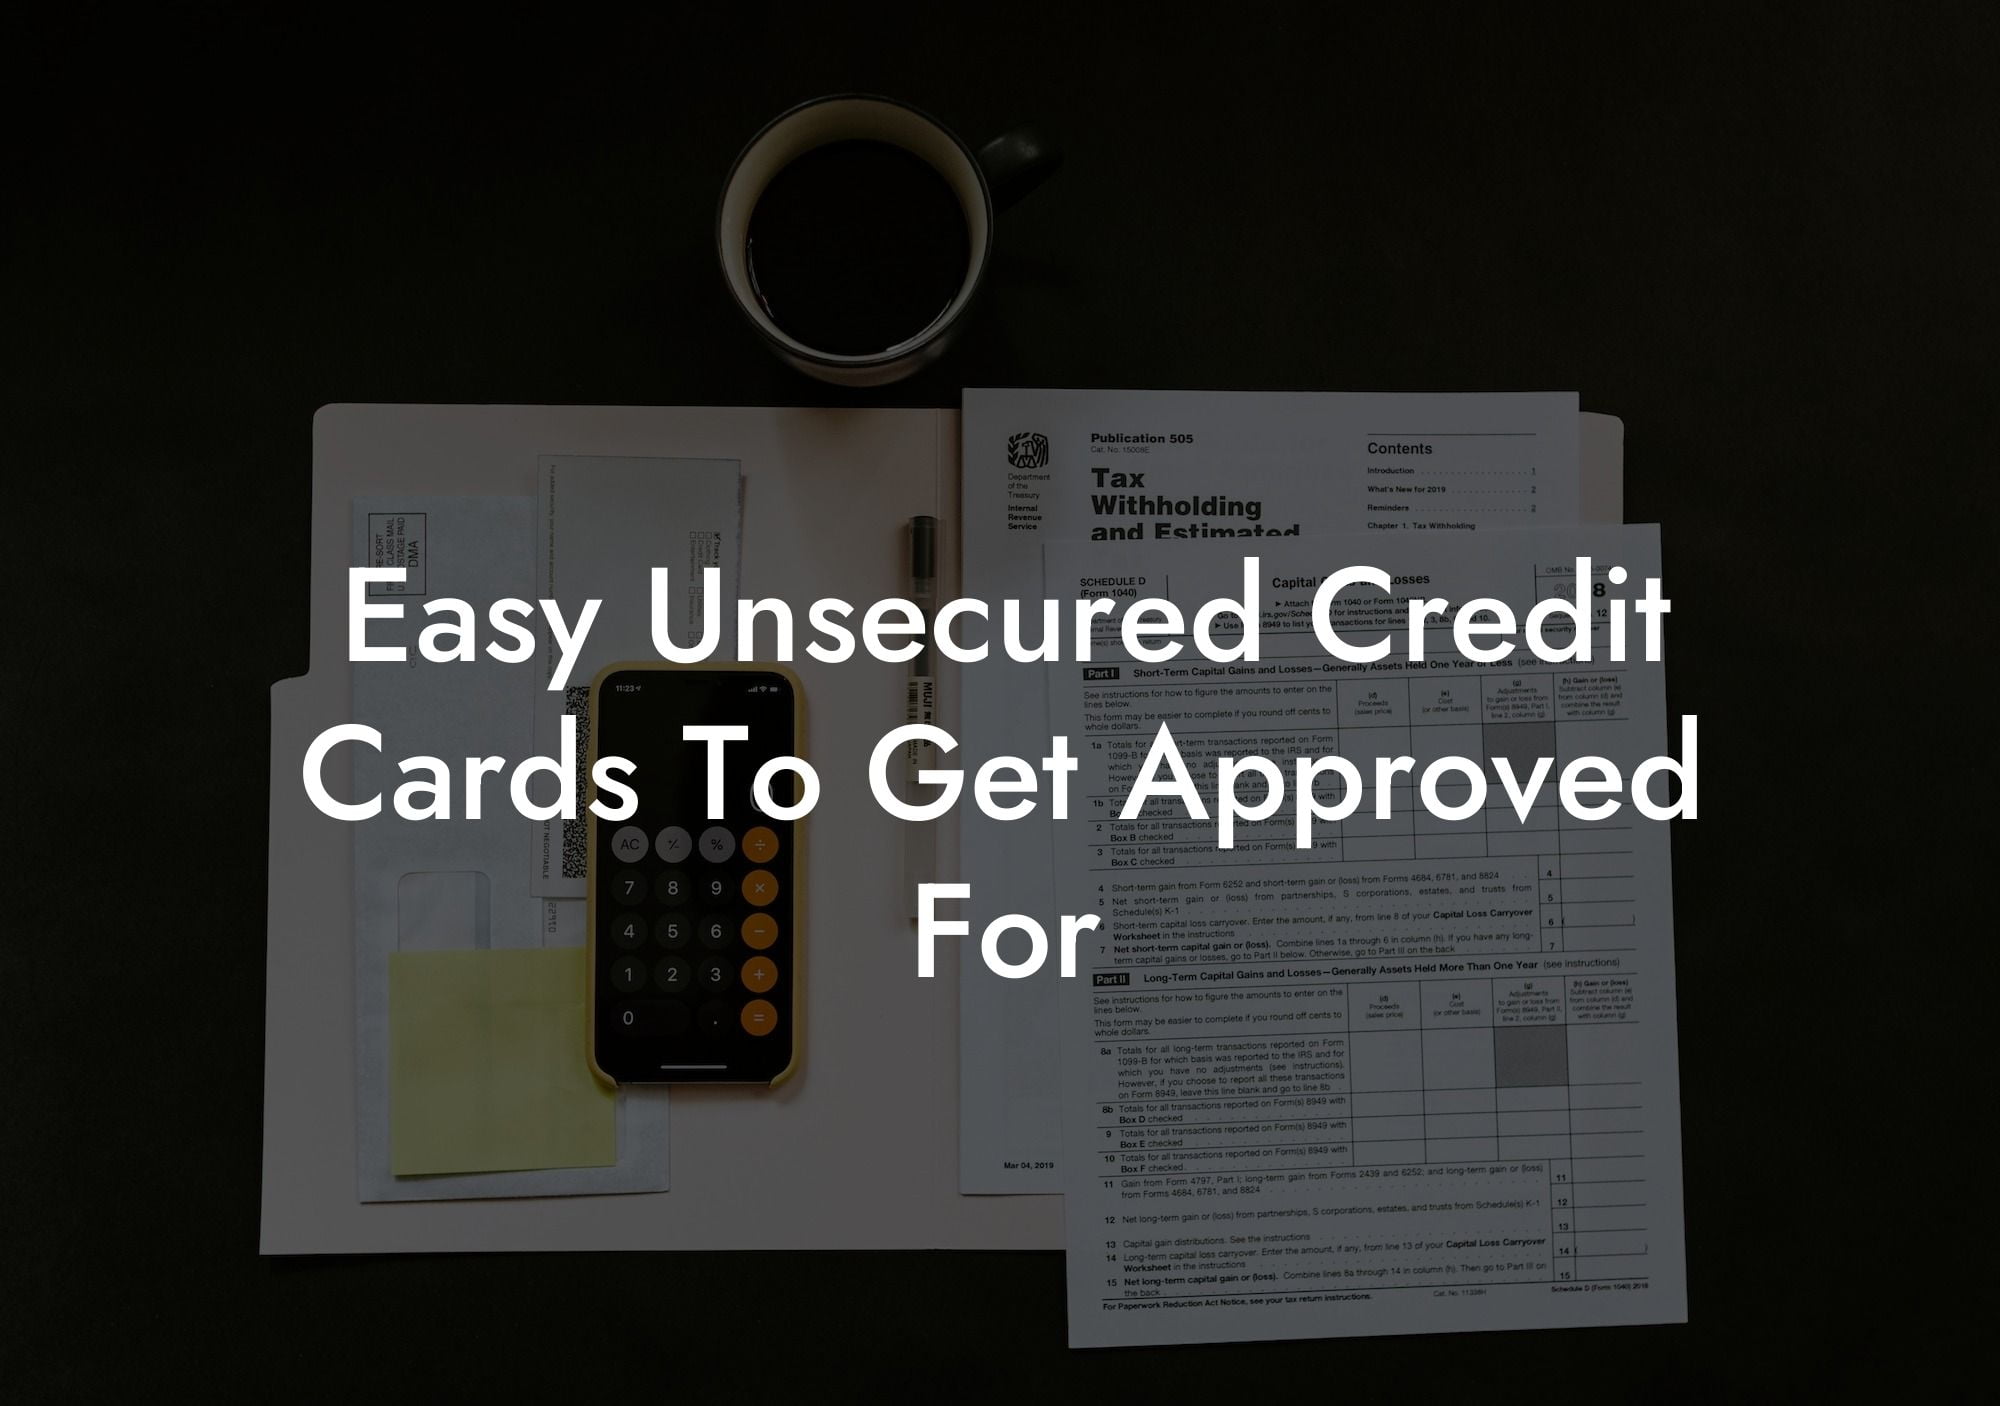 Easy Unsecured Credit Cards To Get Approved For